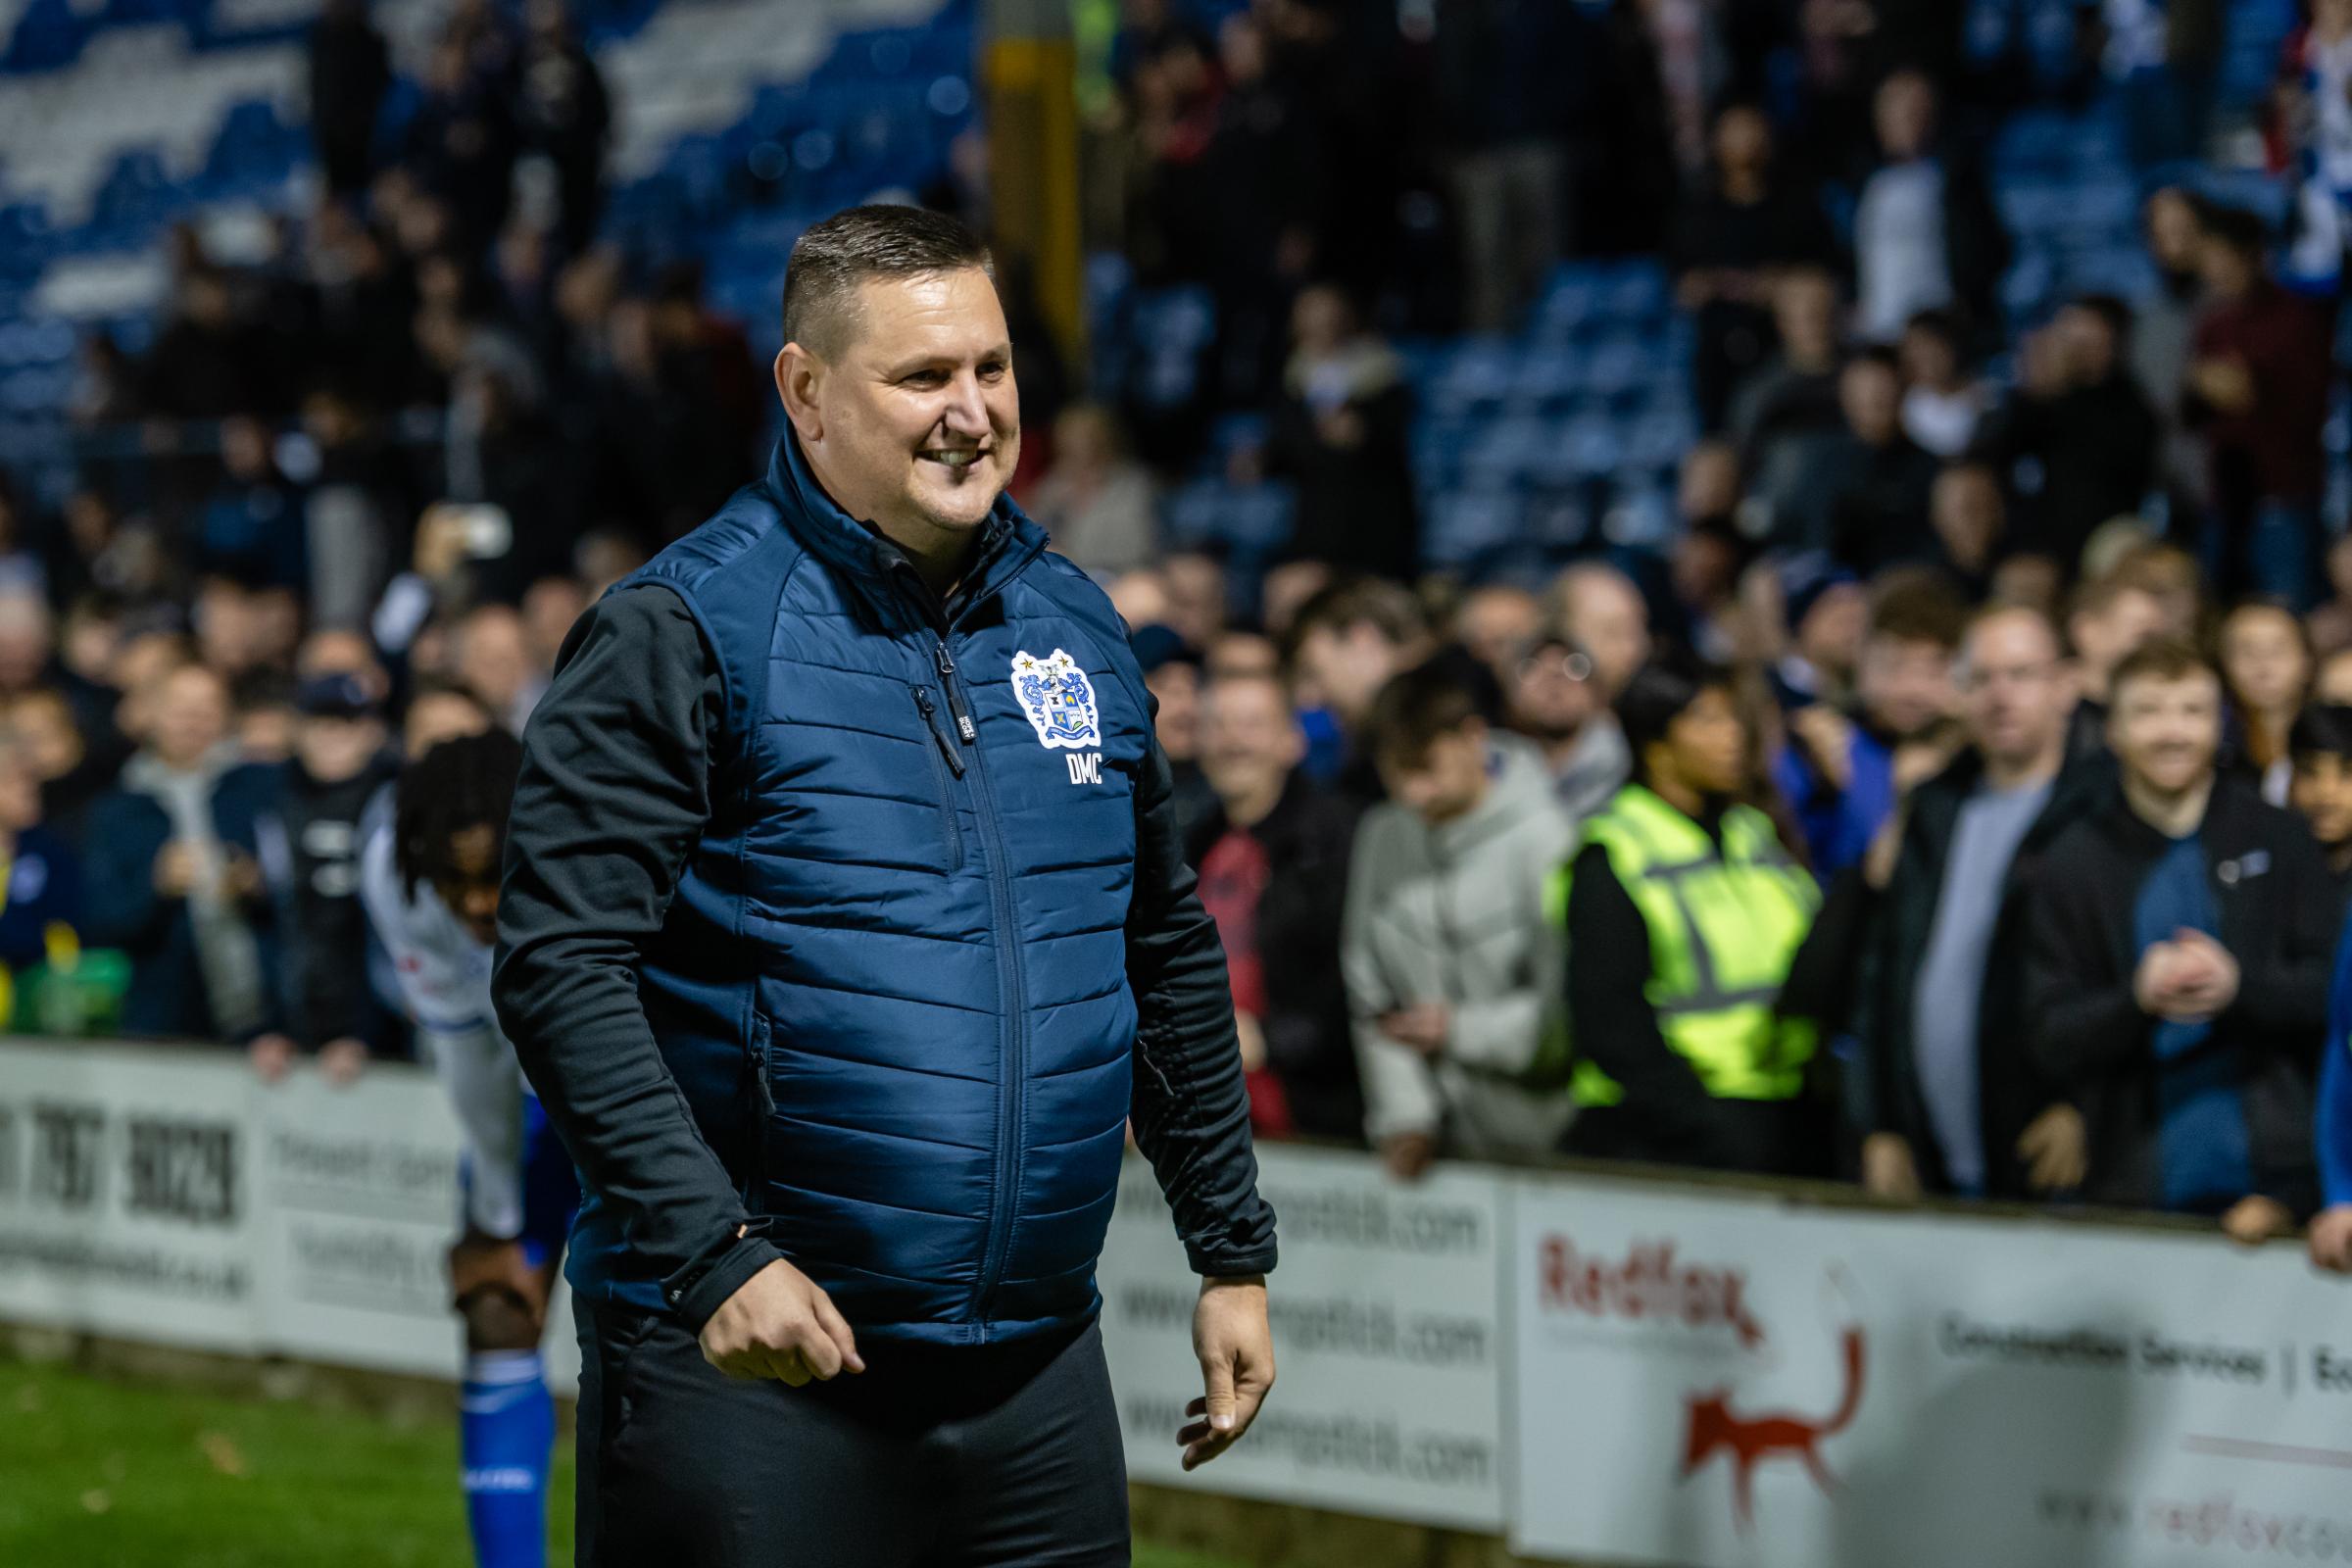 Perfect 10 for record-breaking Shakers at Gigg Lane